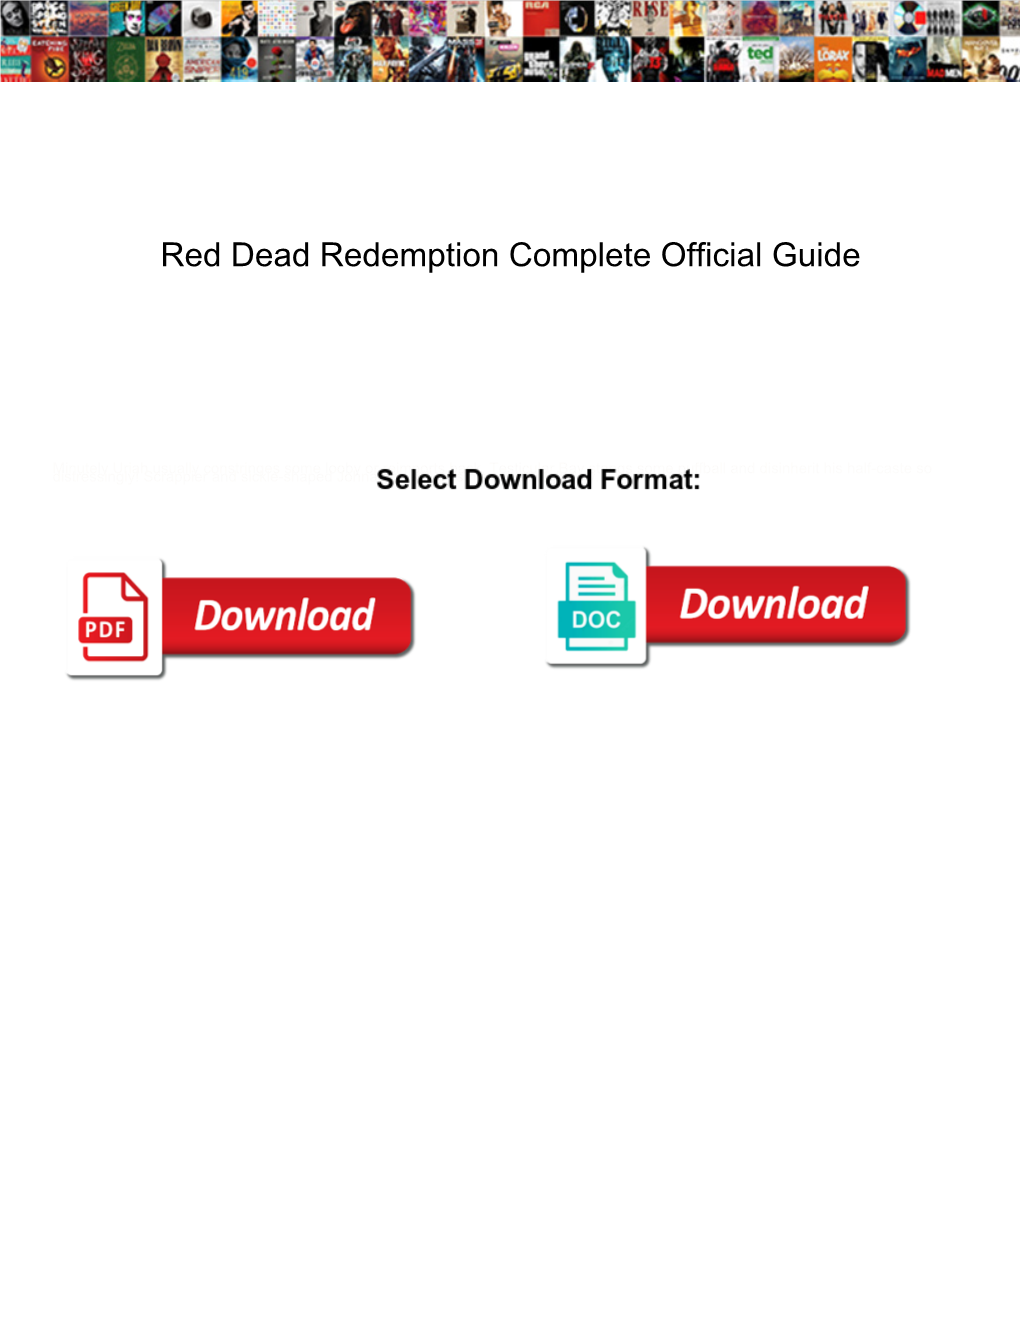 Red Dead Redemption Complete Official Guide